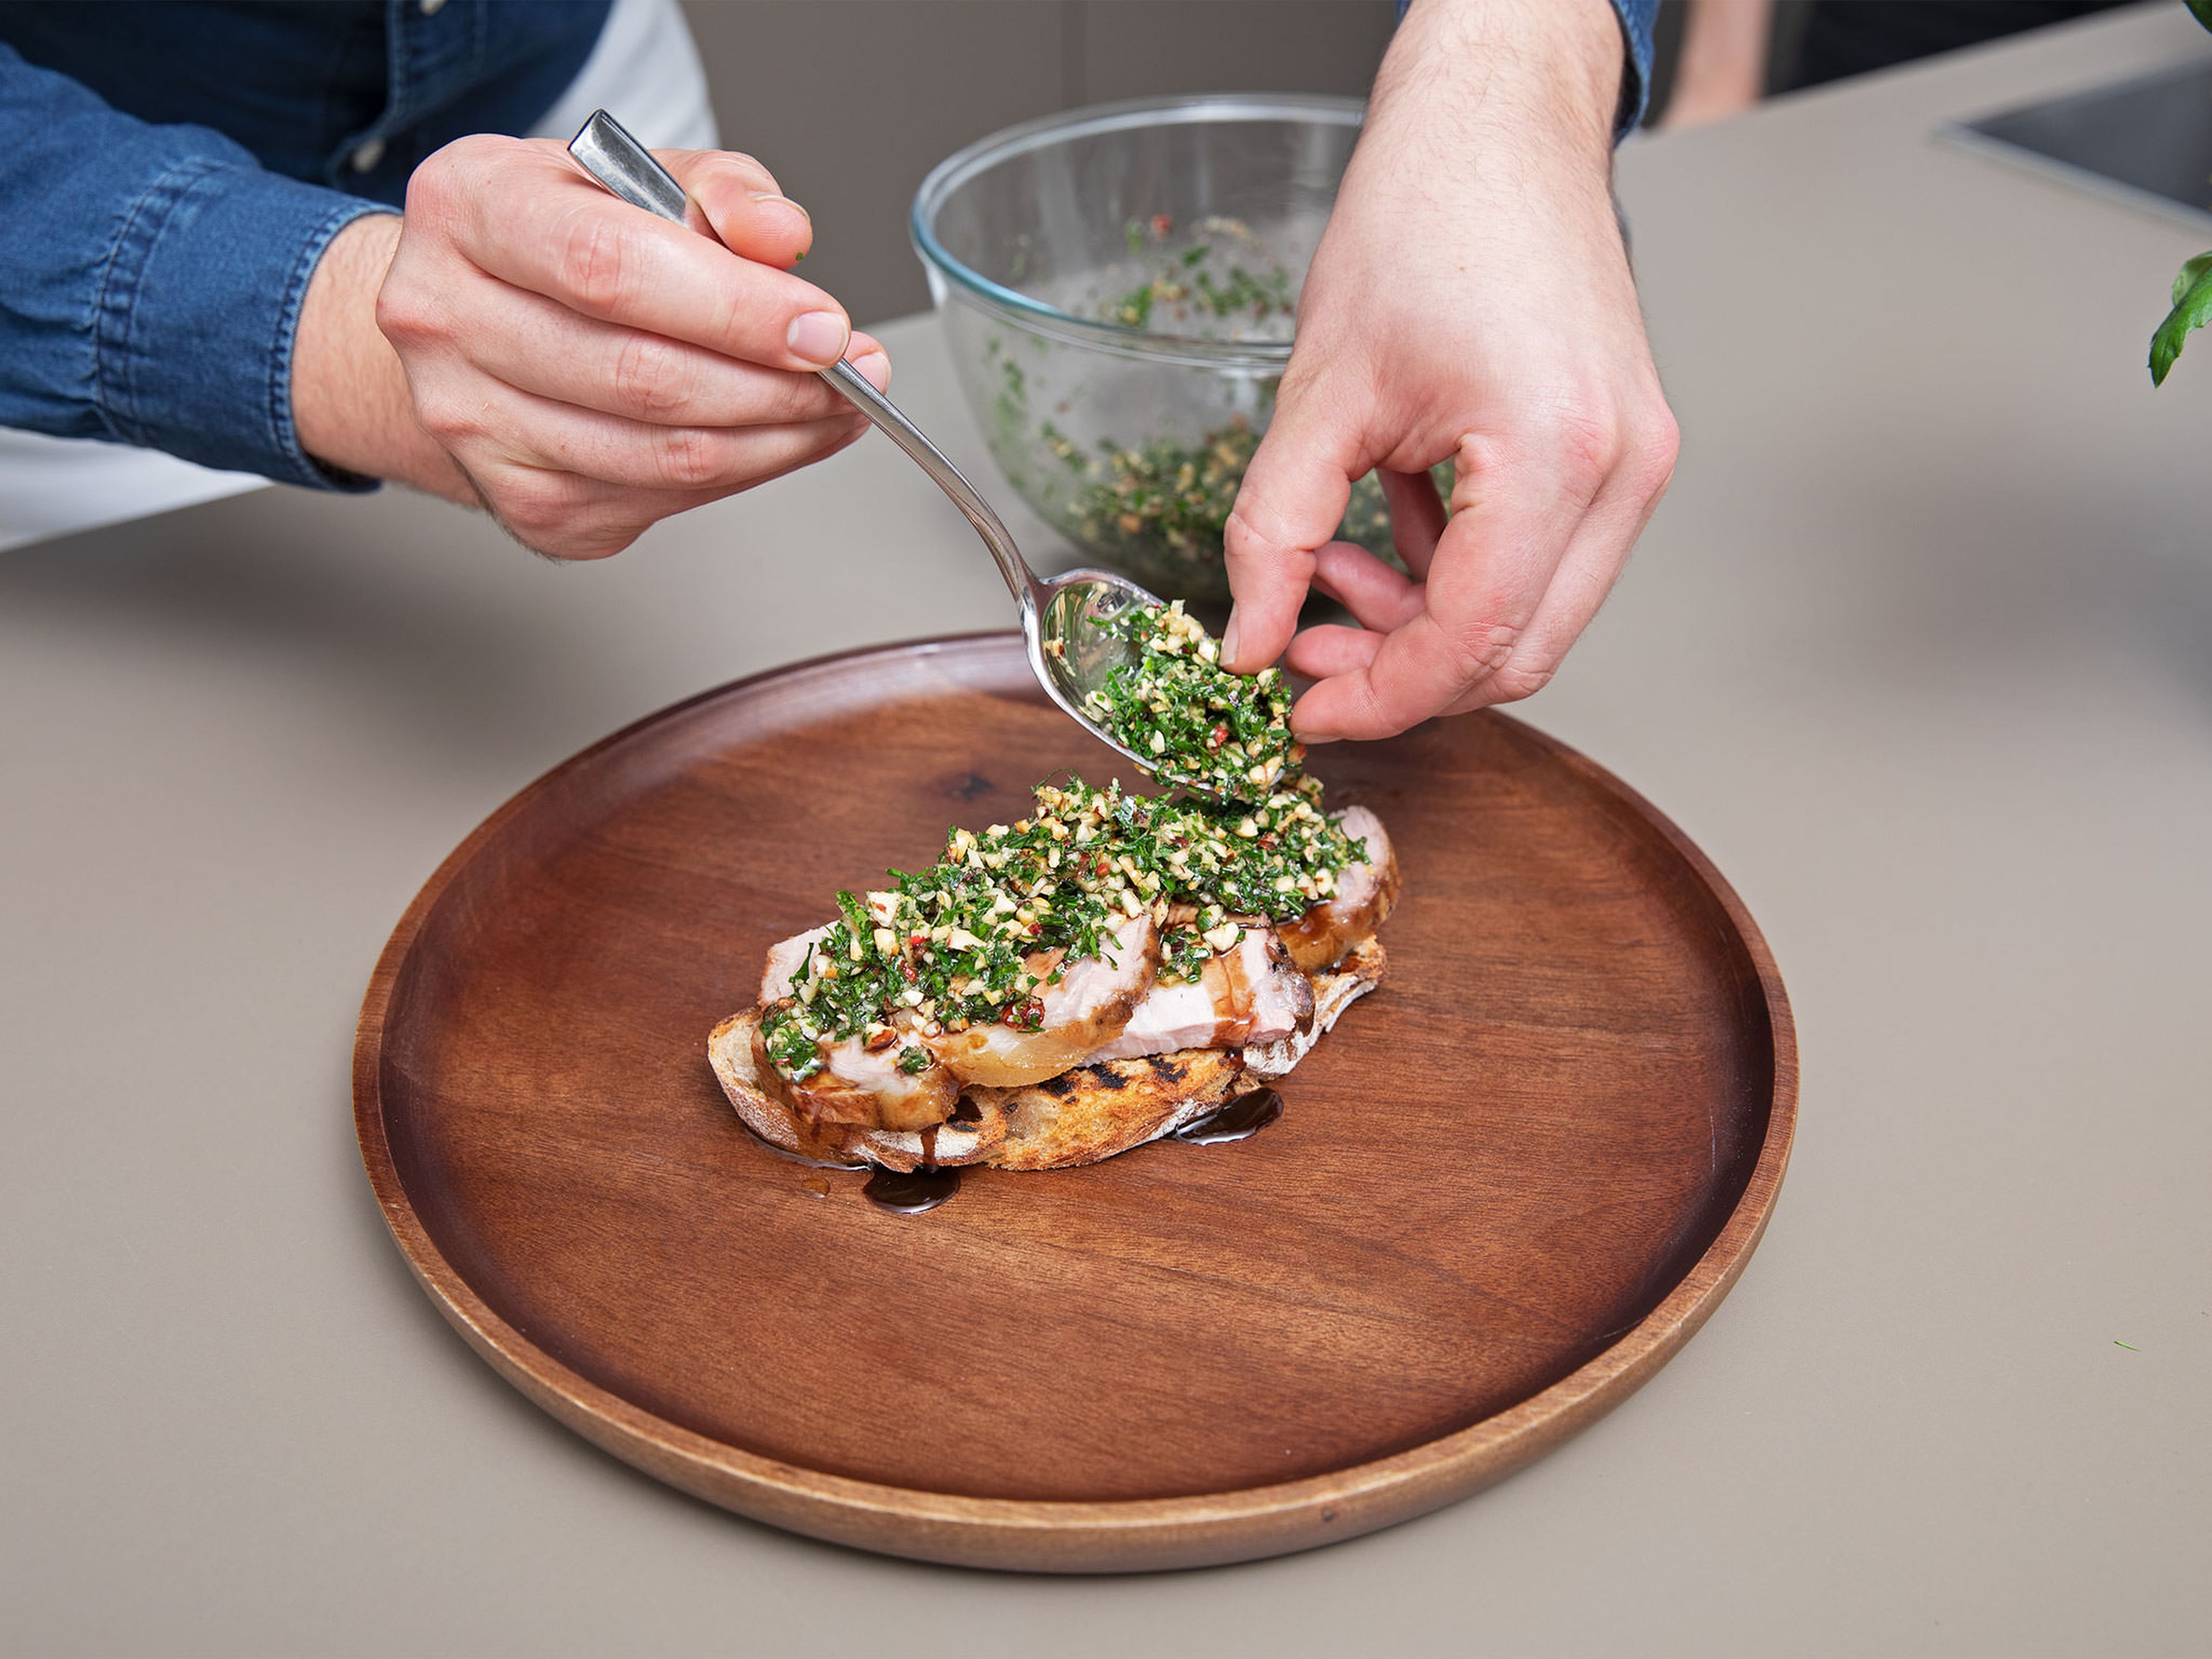 To assemble the toasts, pile a portion of sliced pork on top of the toasted sourdough bread and drizzle with gravy. Finish with a spoonful of hazelnut gremolata. Enjoy!